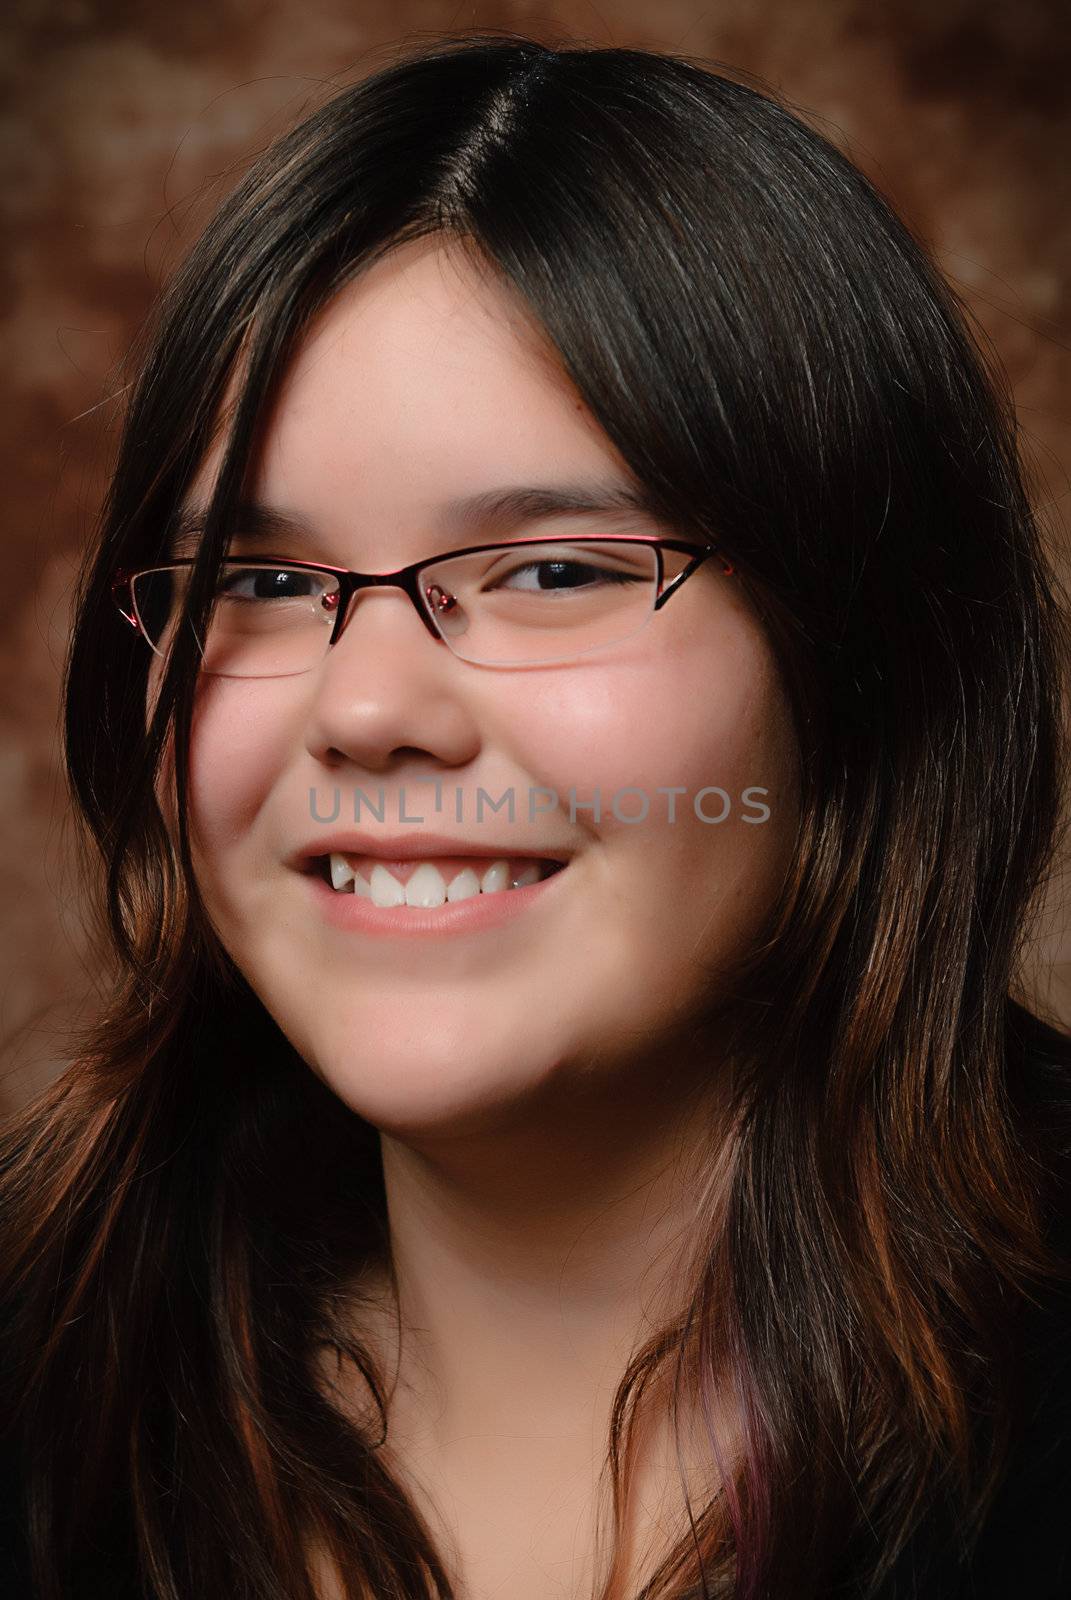 Cute preteen girl with wavy hair is smiling for her portrait